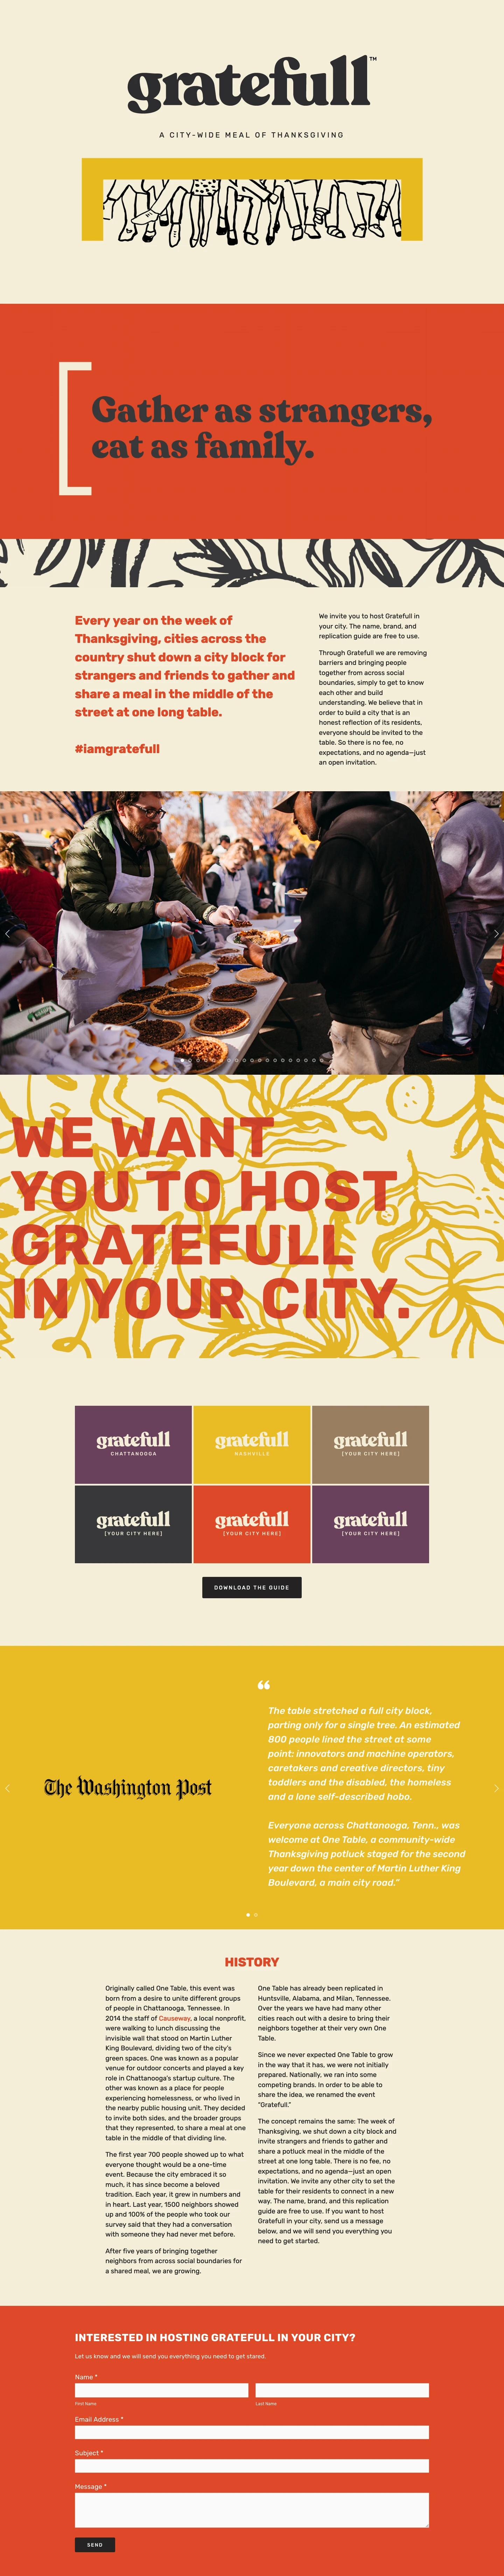 gratefull Landing Page Example: Every year on the week of Thanksgiving, cities across the country shut down a city block for strangers and friends to gather and share a meal in the middle of the street at one long table.